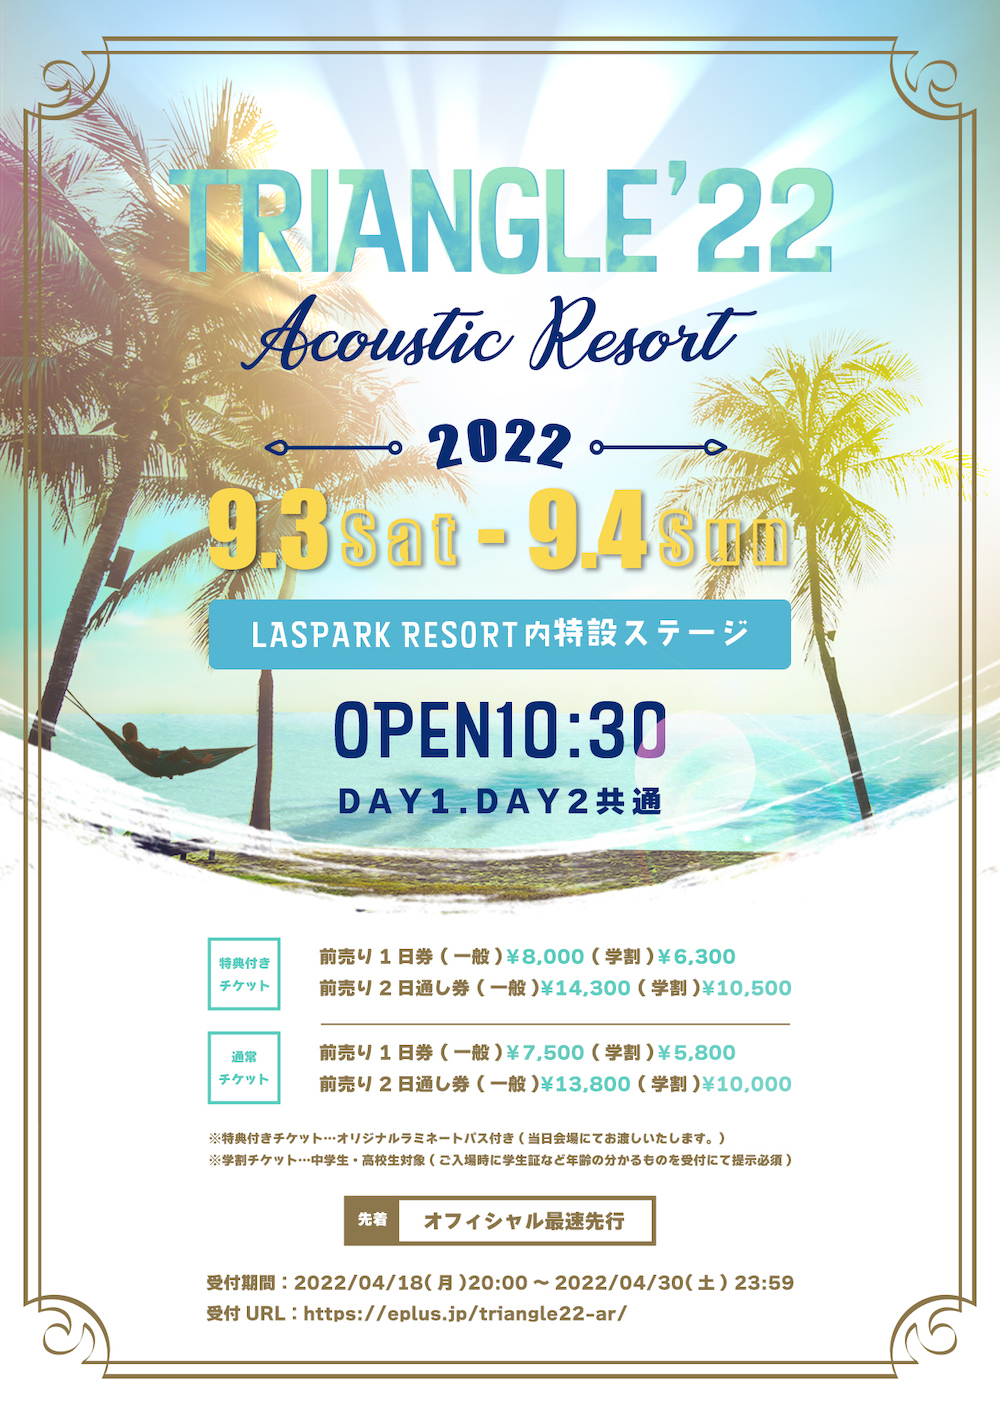 『TRIANGLE'22 Acoustic Resort』